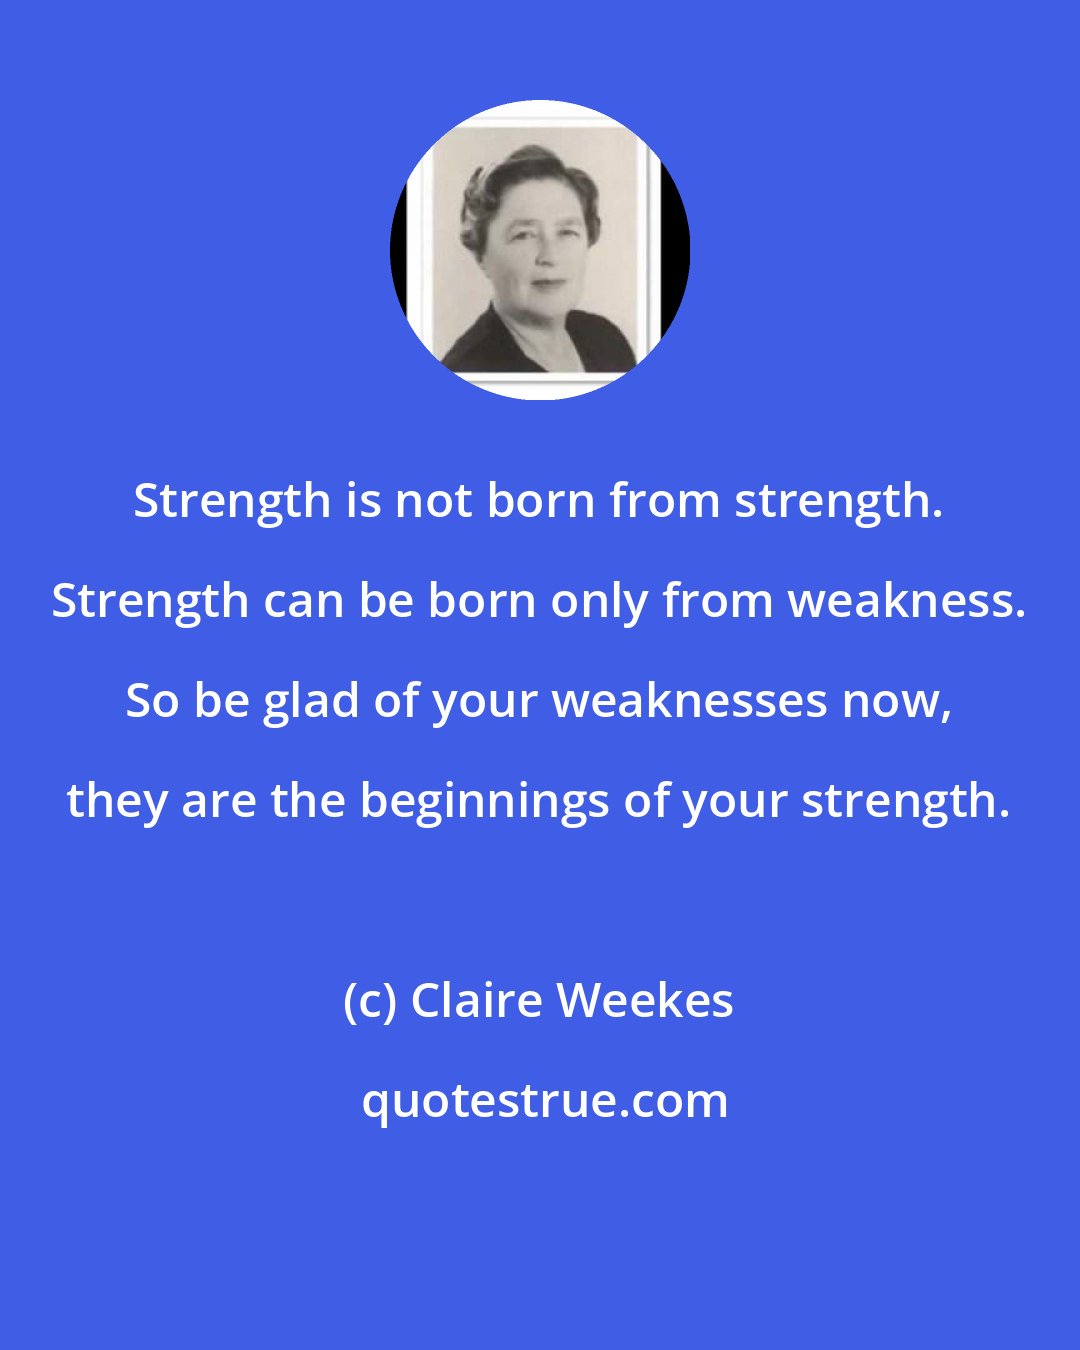 Claire Weekes: Strength is not born from strength. Strength can be born only from weakness. So be glad of your weaknesses now, they are the beginnings of your strength.